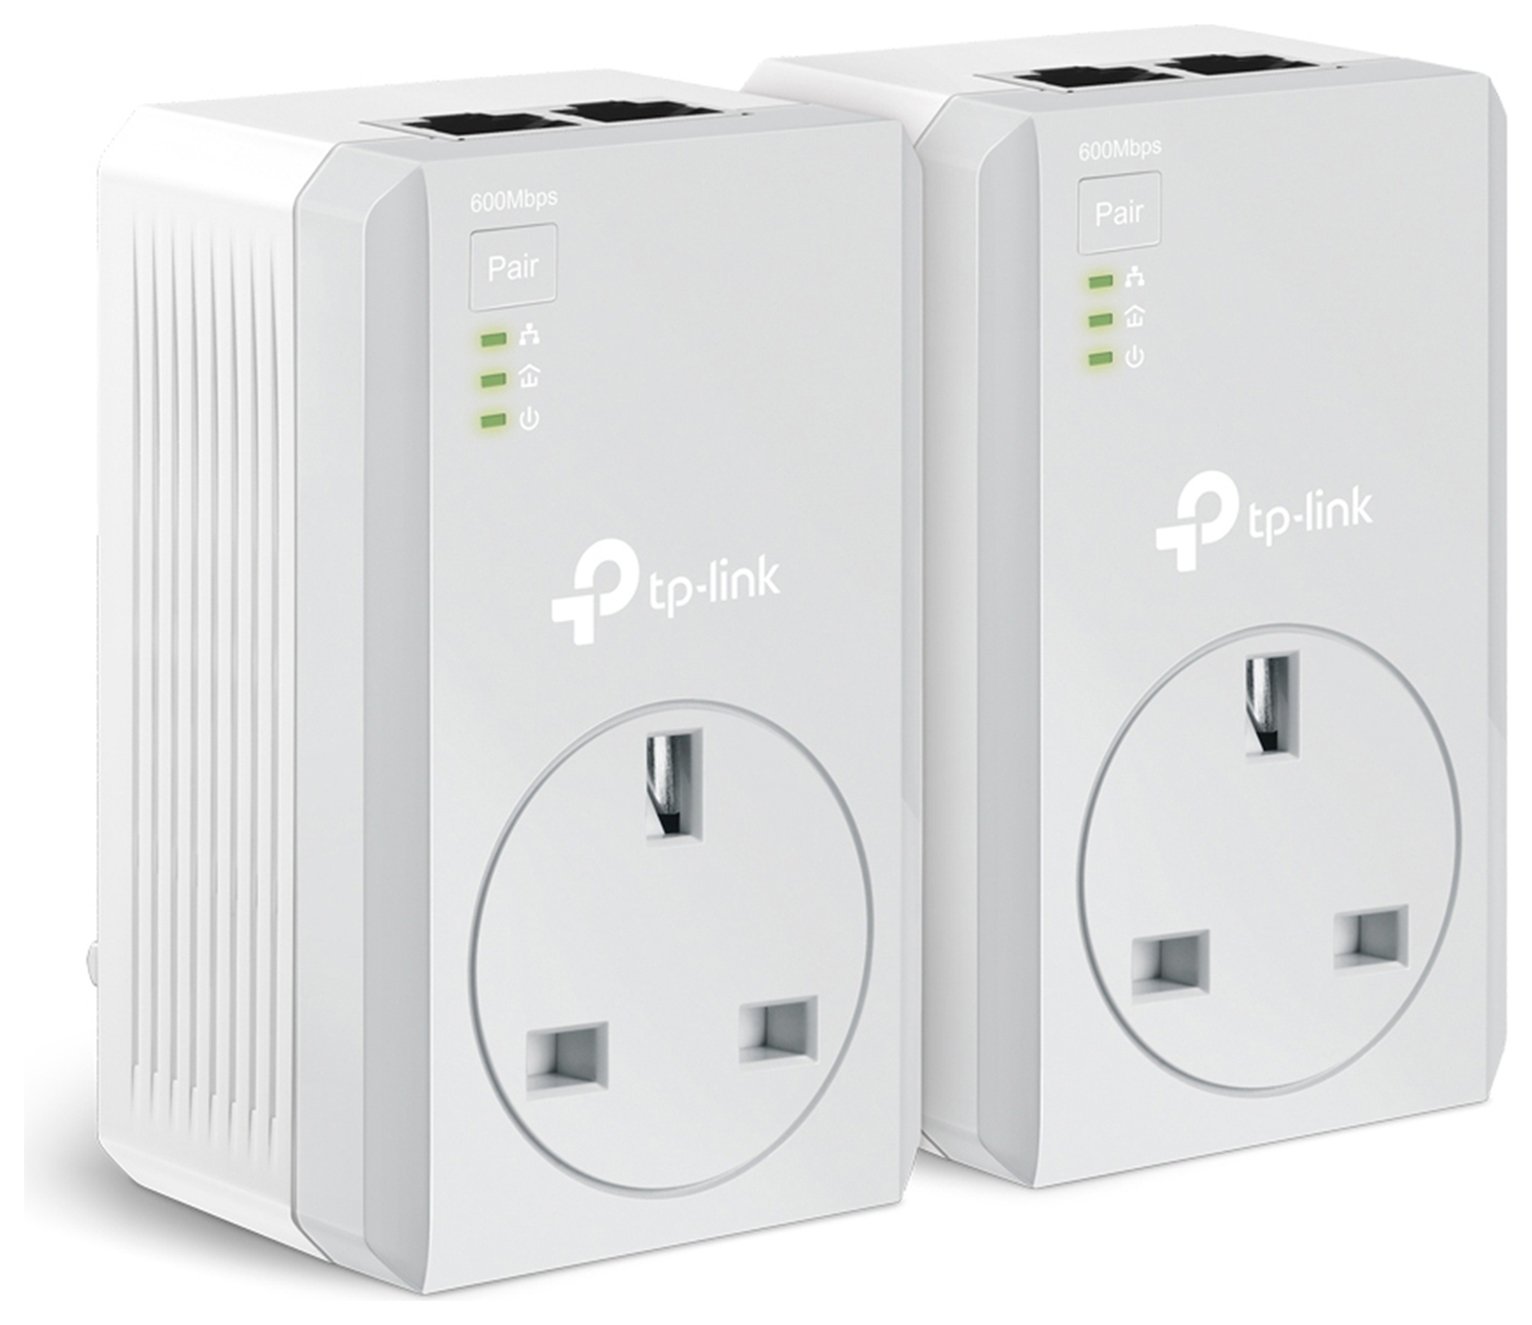 TP-LINK 600Mbps Pass through Powerline Adapter Kit